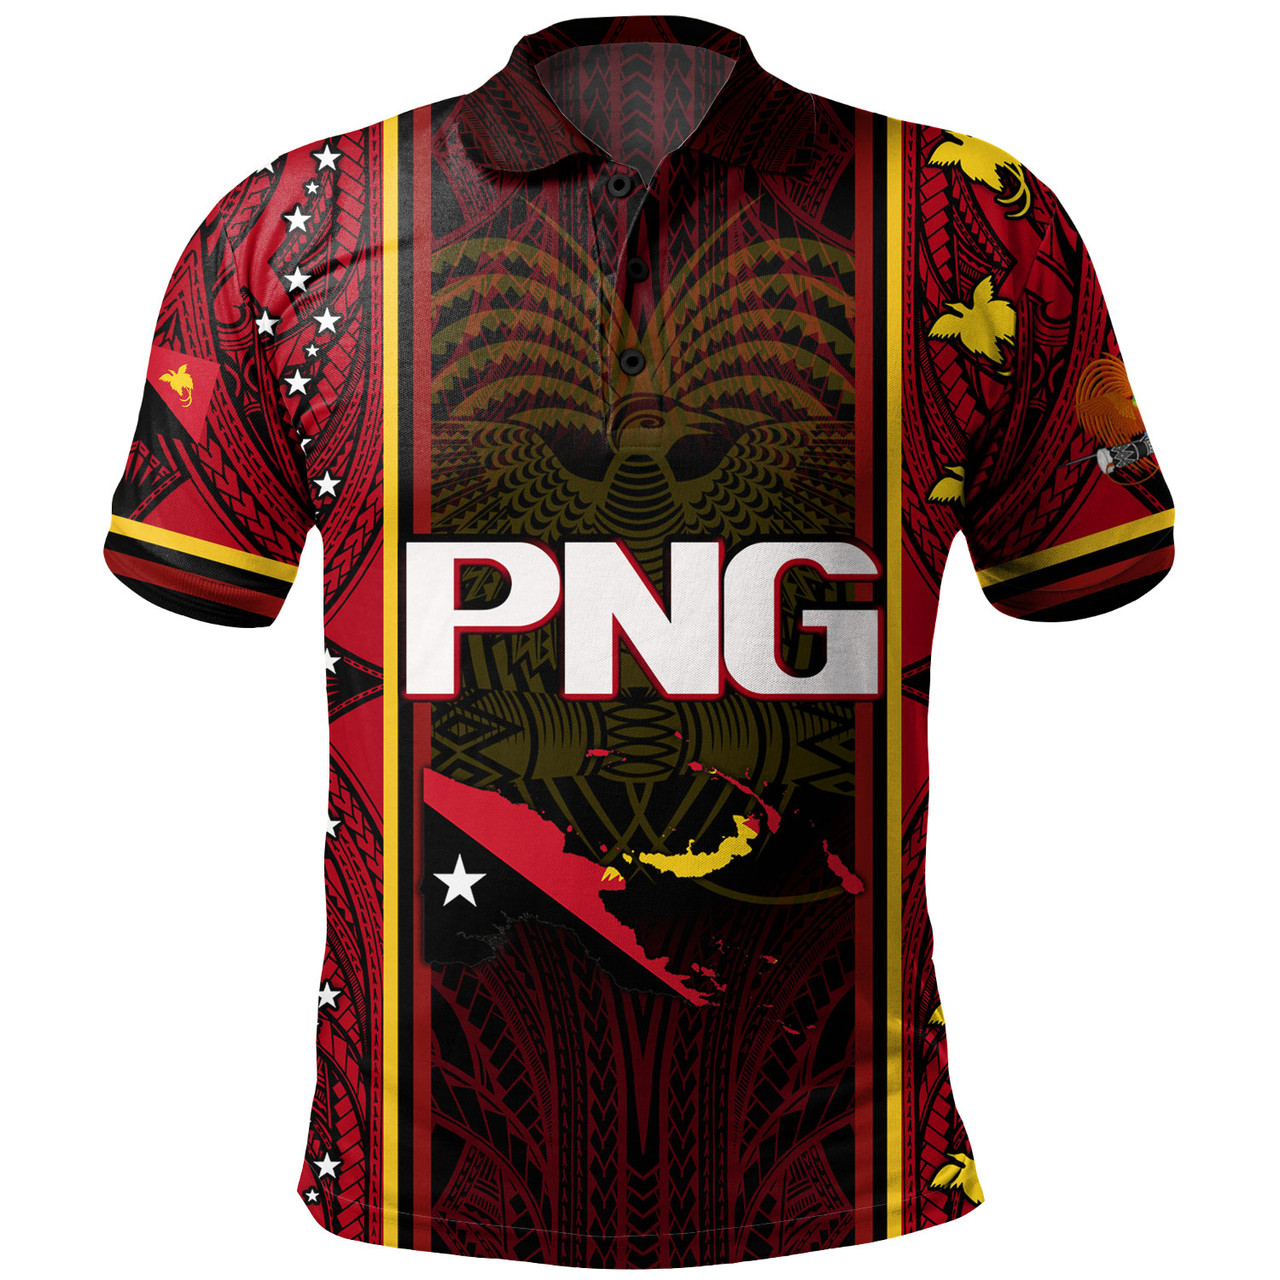 Papua New Guinea Custom Personalised Polo Shirt  Seal And Map Tribal Traditional Patterns